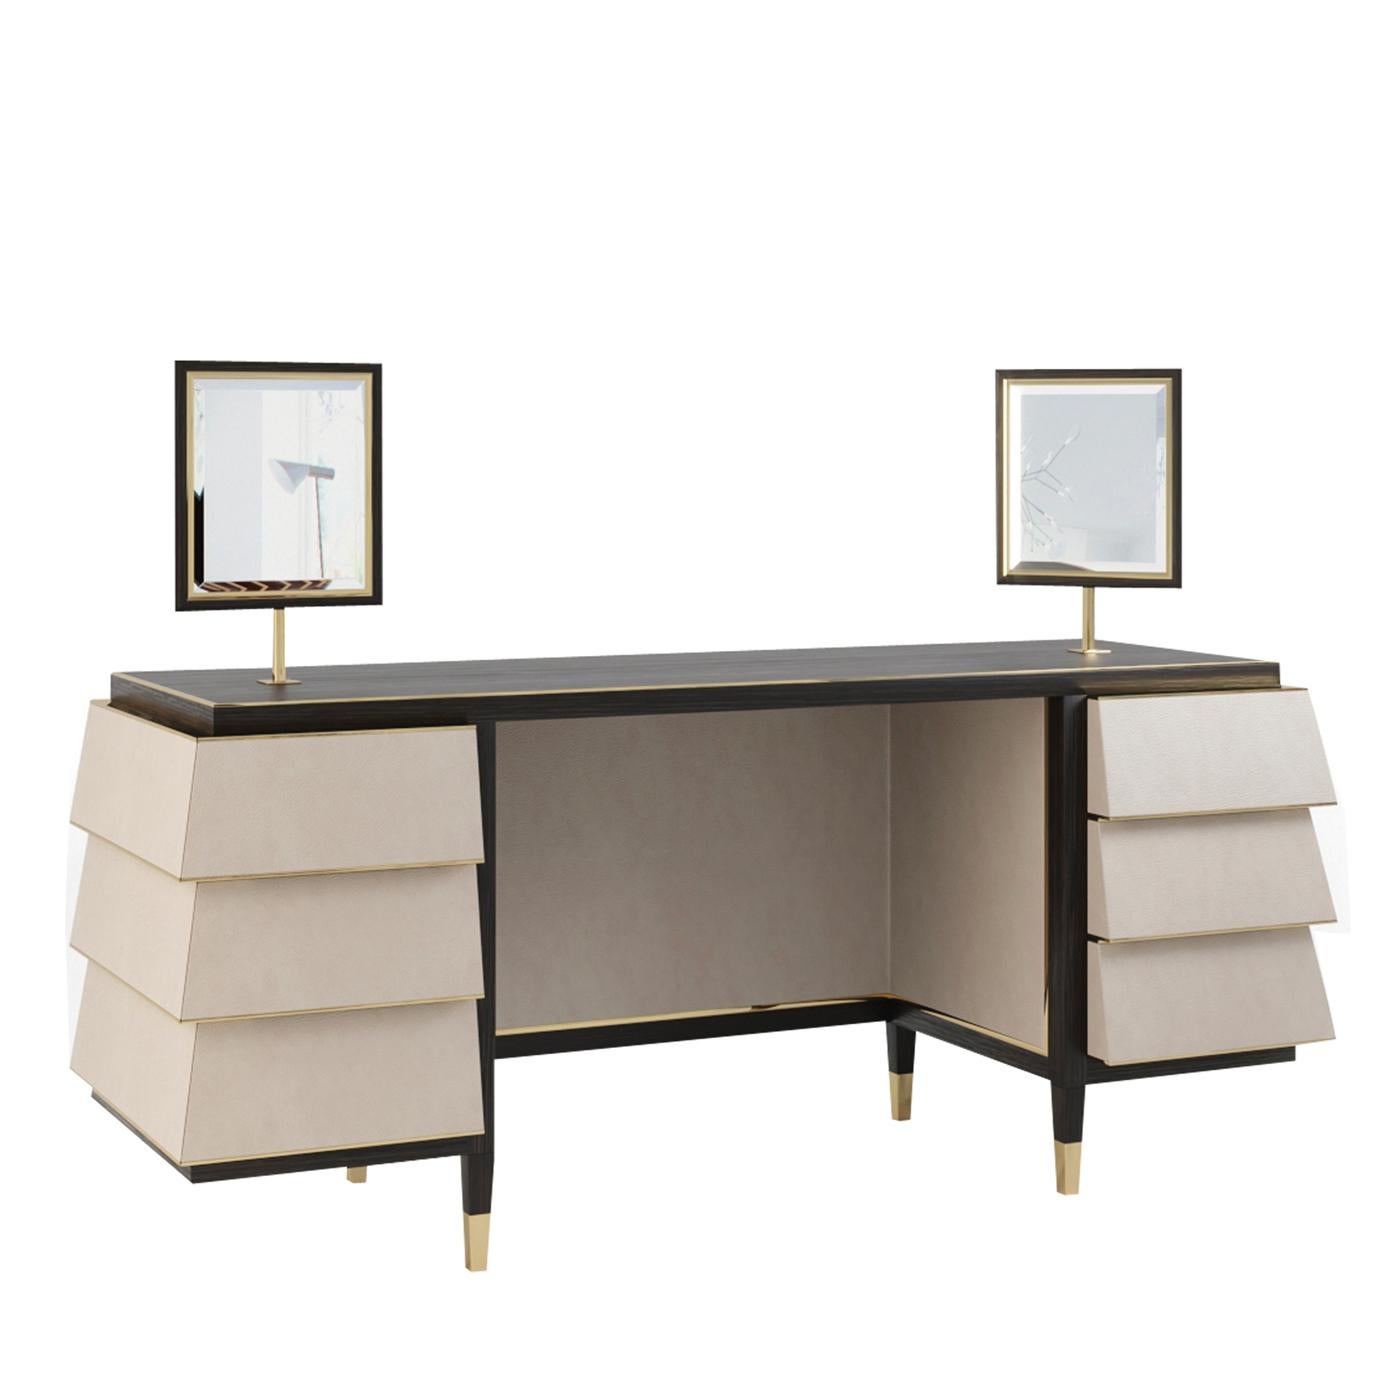 Displaying an exquisitely symmetrical structure, equipped with two built-in rectangular mirrors, this exclusive wooden vanity is supported by four tapered feet with brass-finished metal details. It comprises six drawers with a stunning,